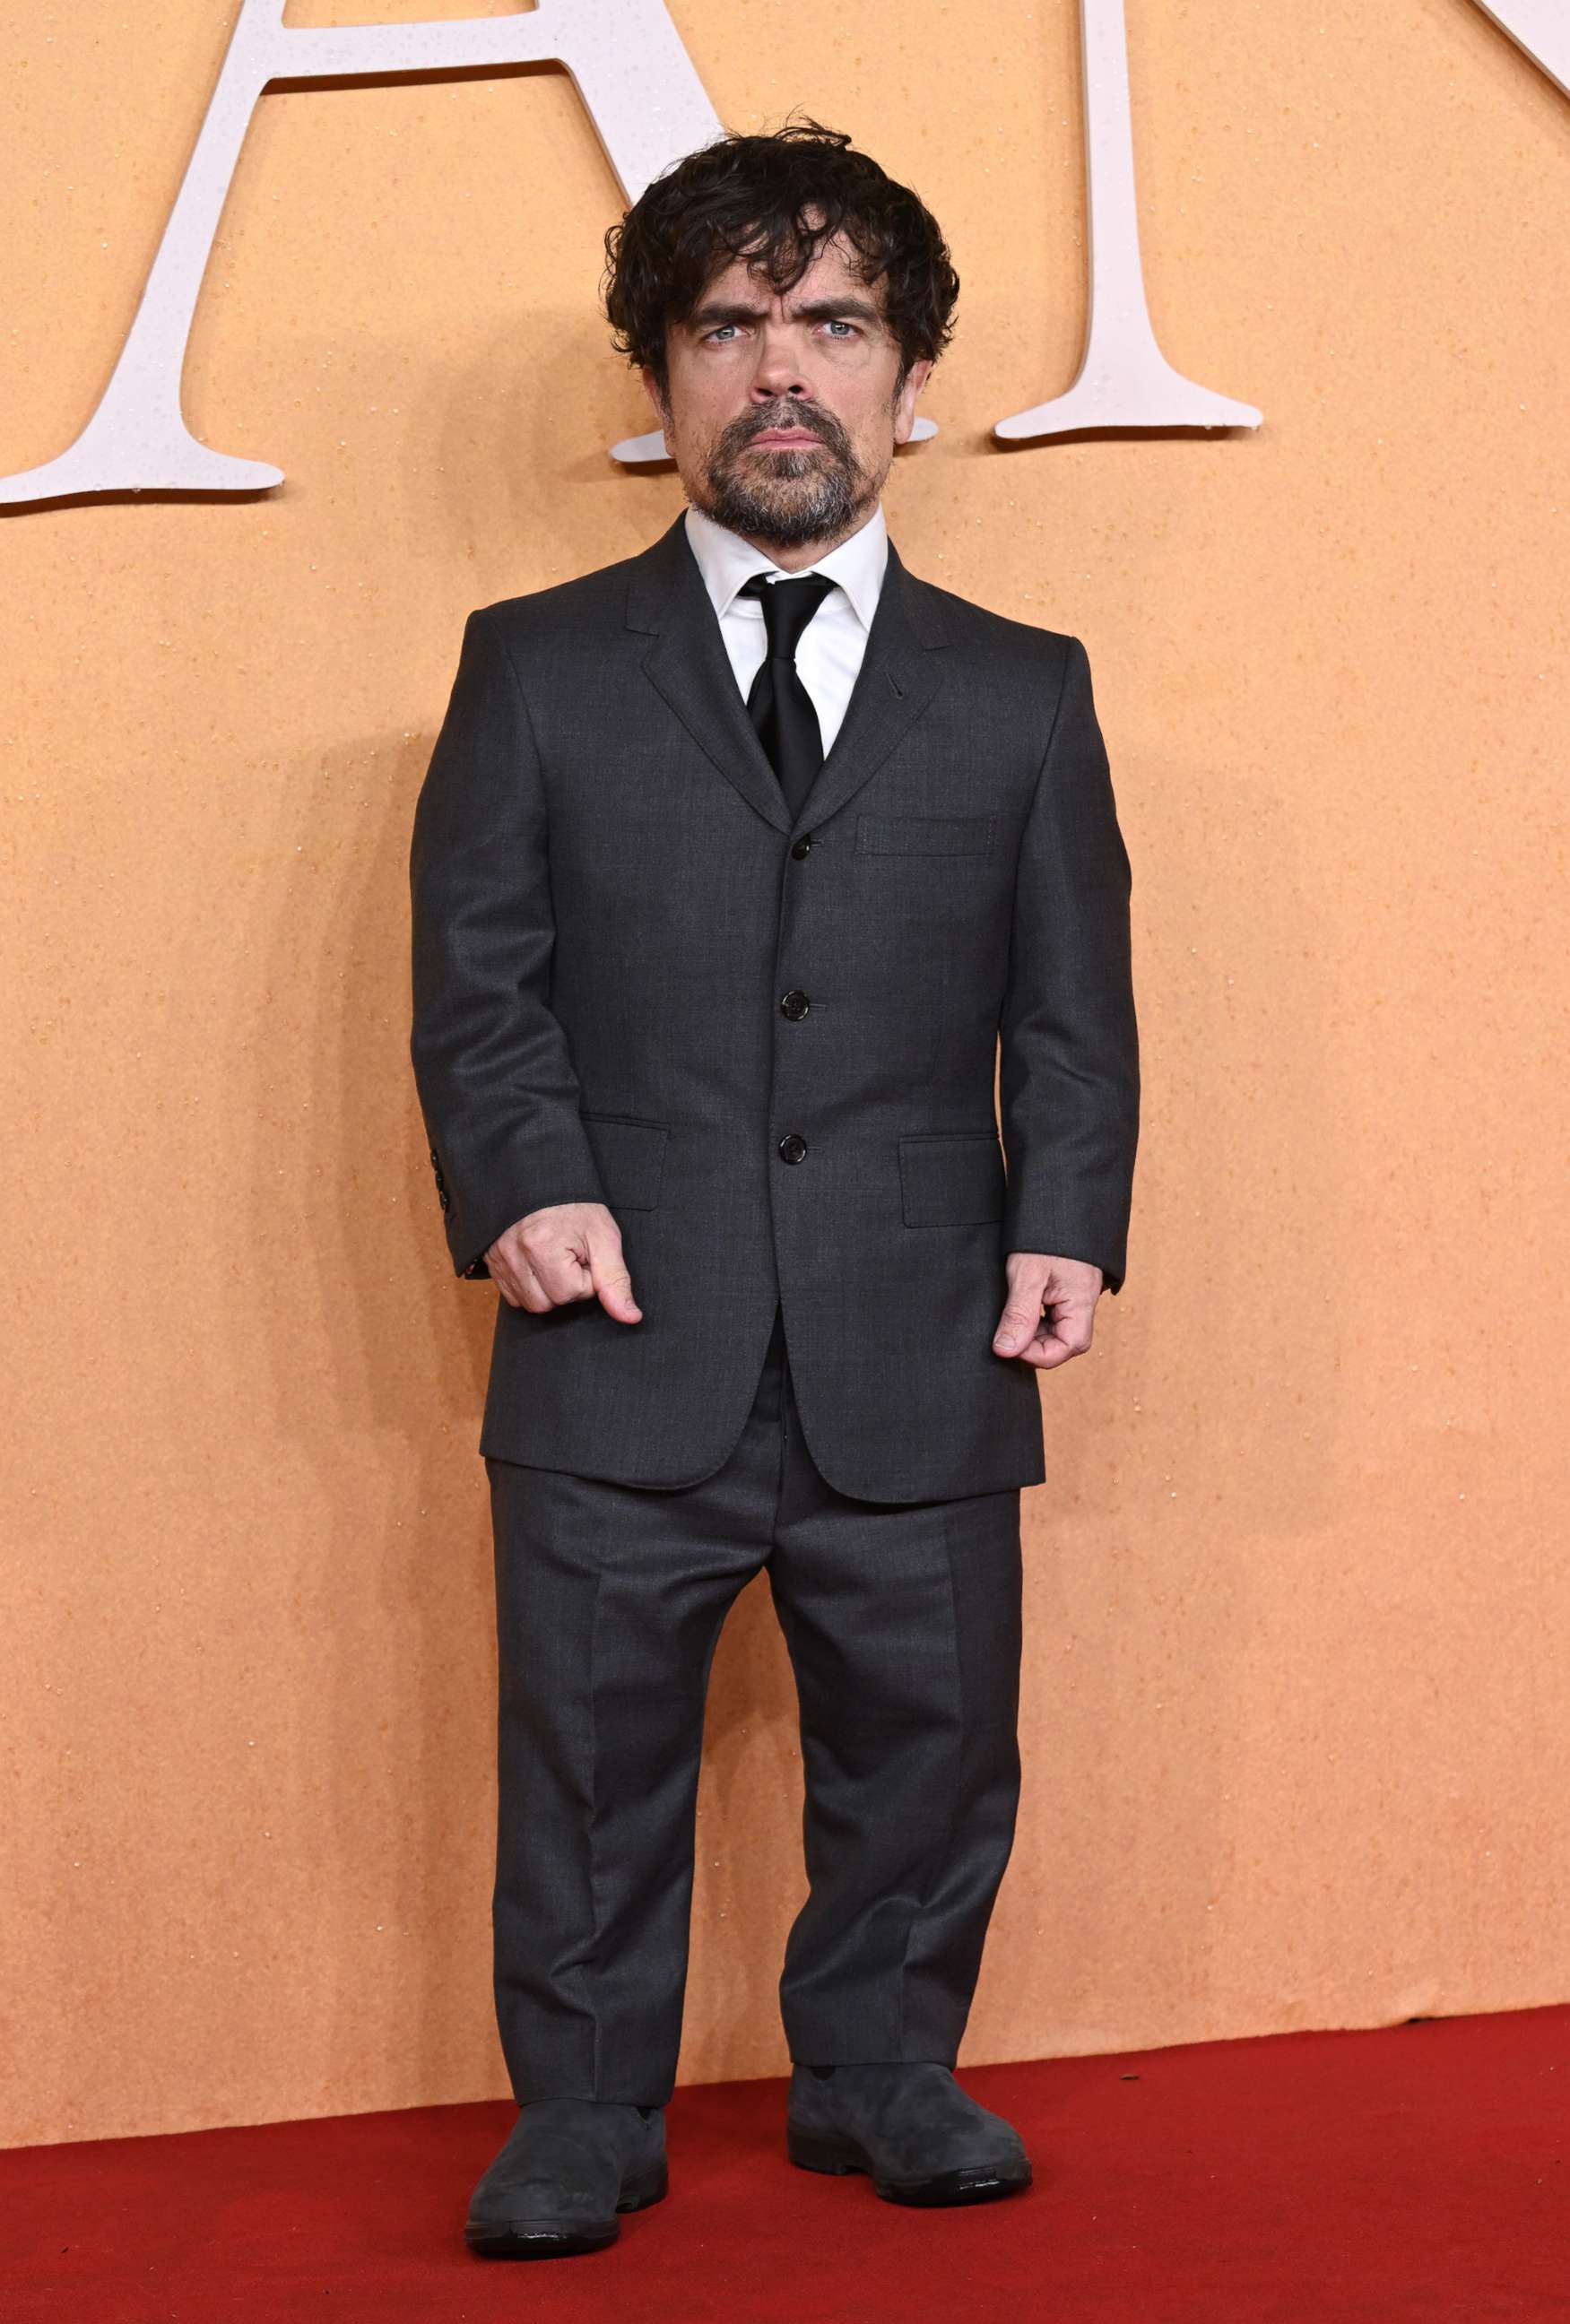 PHOTO: In this Dec. 7, 2021, file photo, Peter Dinklage attends the UK premiere of "Cyrano" in London.